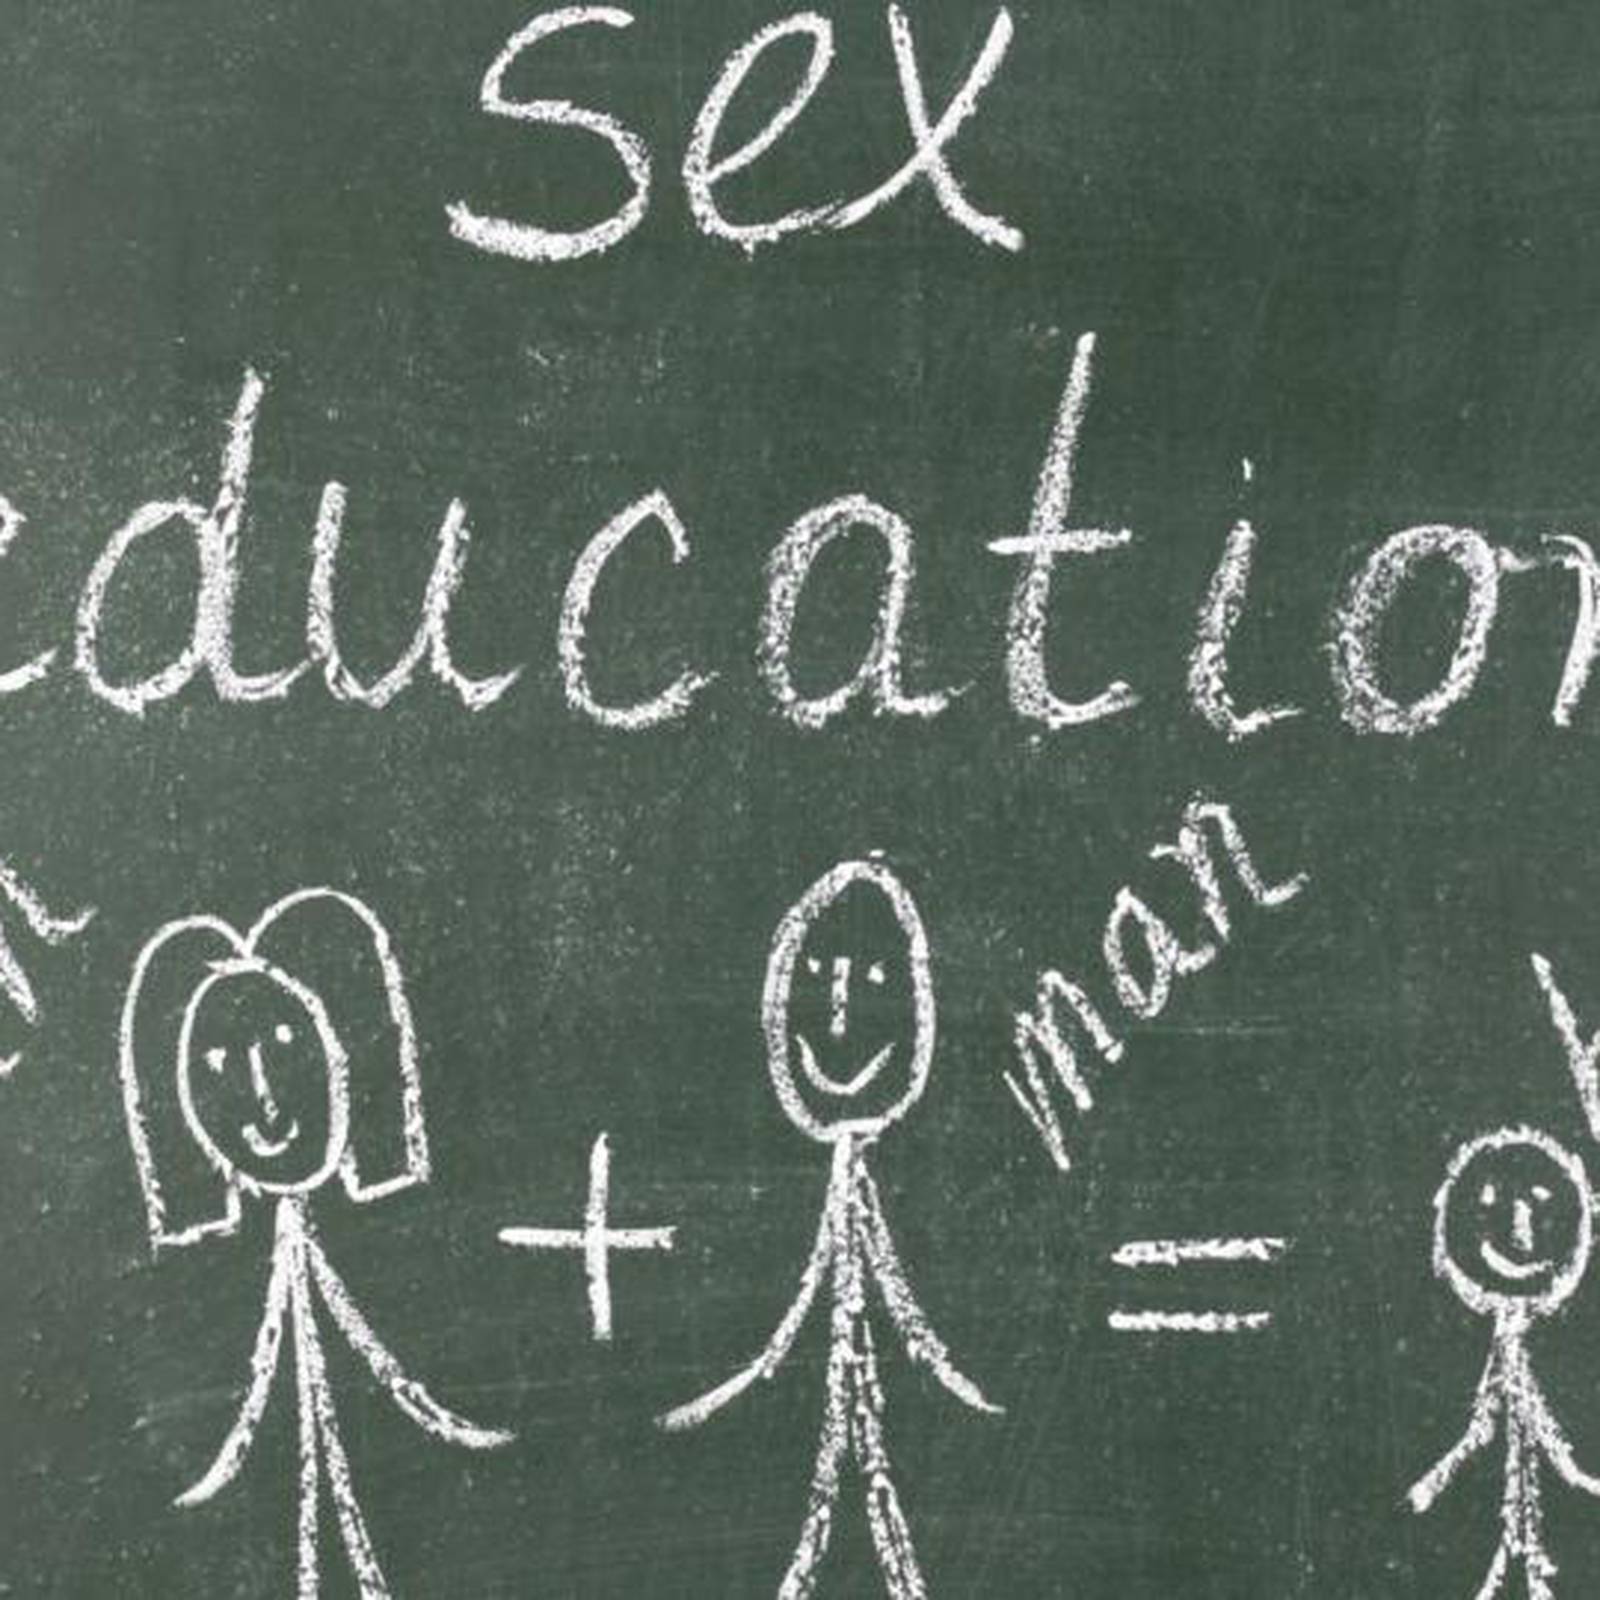 Sex education â€“ too much information or or not enough? â€“ The Irish Times